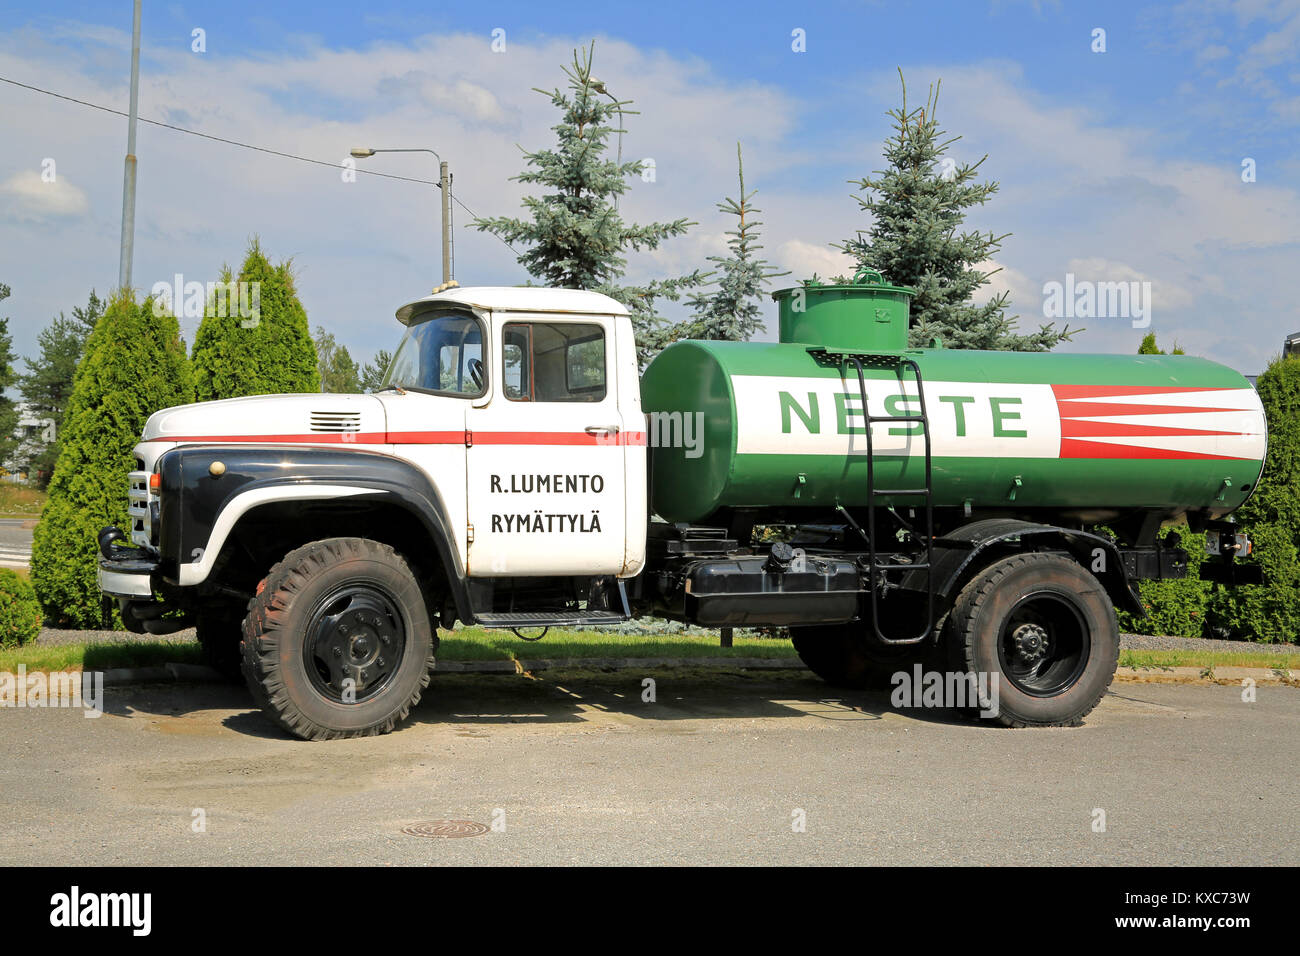 RAISIO, FINLAND - JULY 13, 2014: Vintage Zil 130 Neste tank truck on a yard. Produced since 1962, mass-produced since 1964, Zil 130 was one of the mos Stock Photo